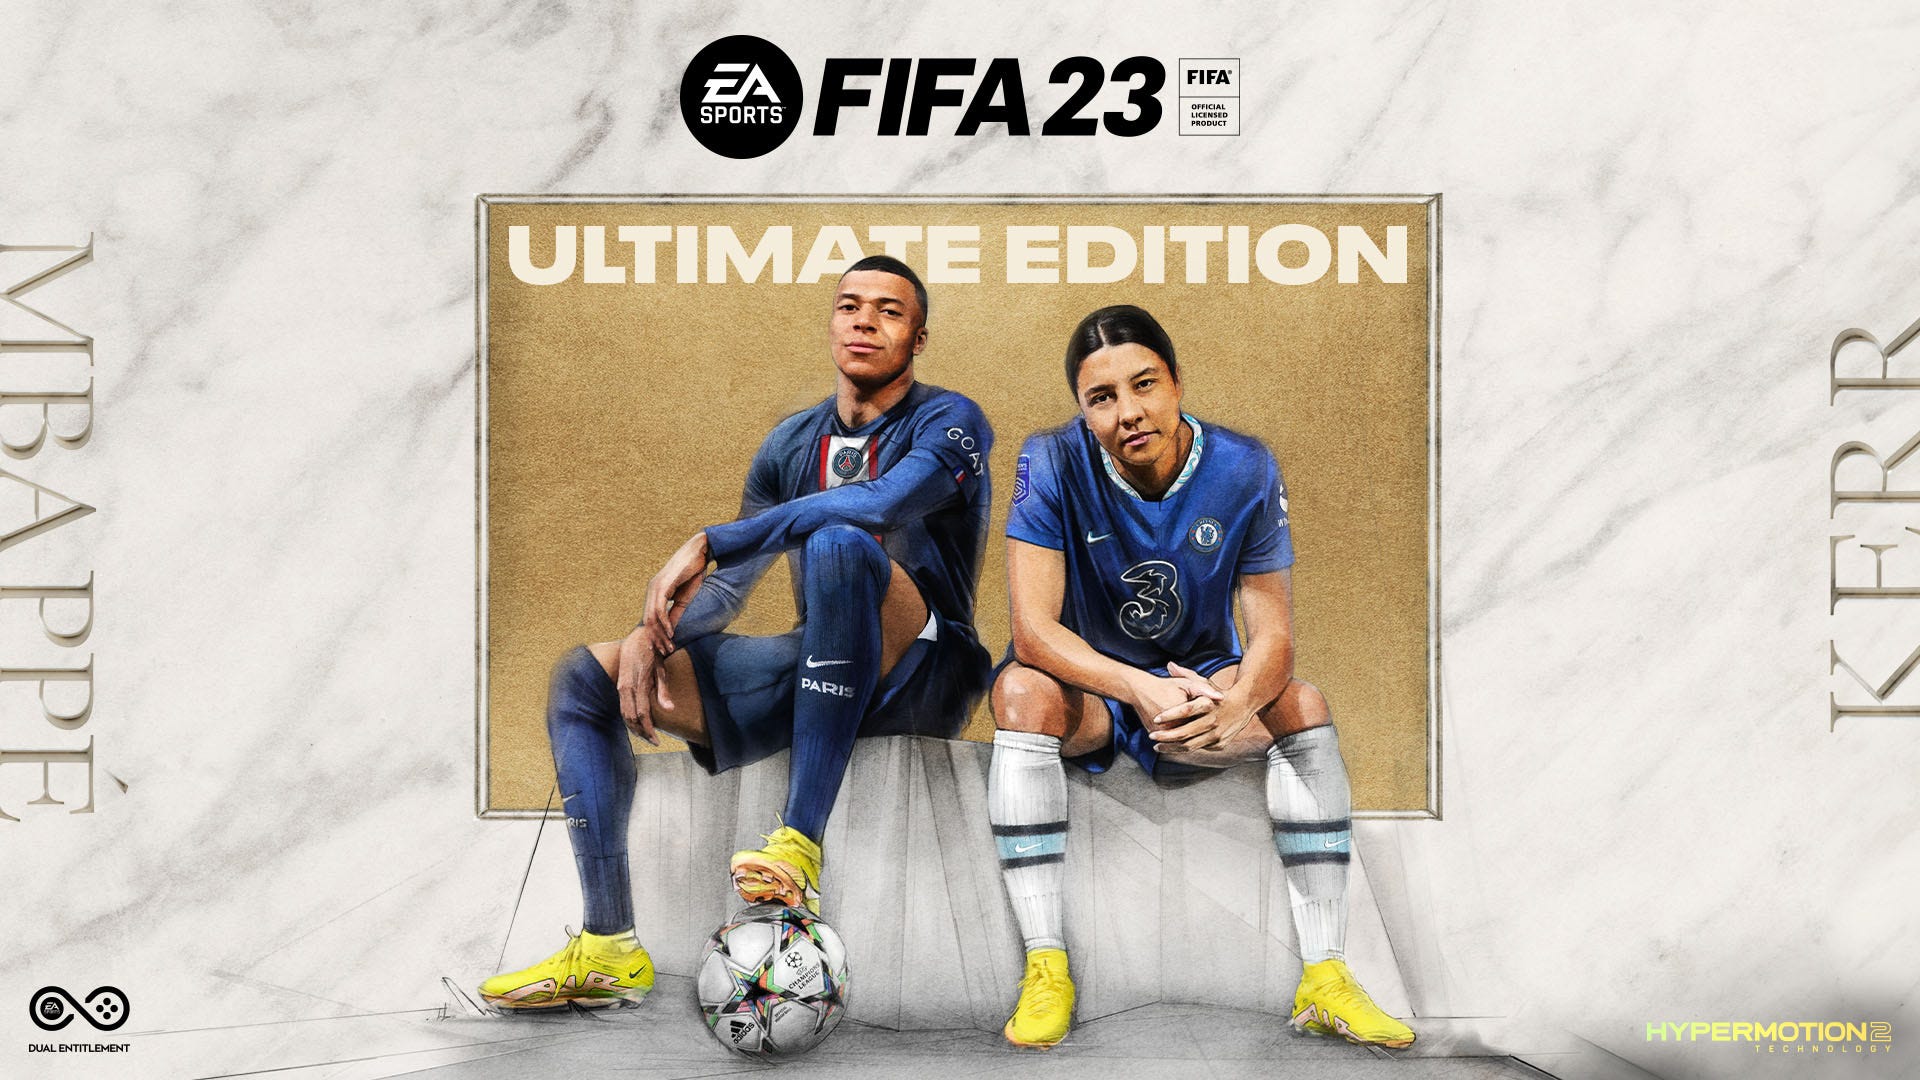 FIFA 23 Final Version cowl revealed: Kerr joins Mbappe in historic first for franchise | Aim.com English Qatar